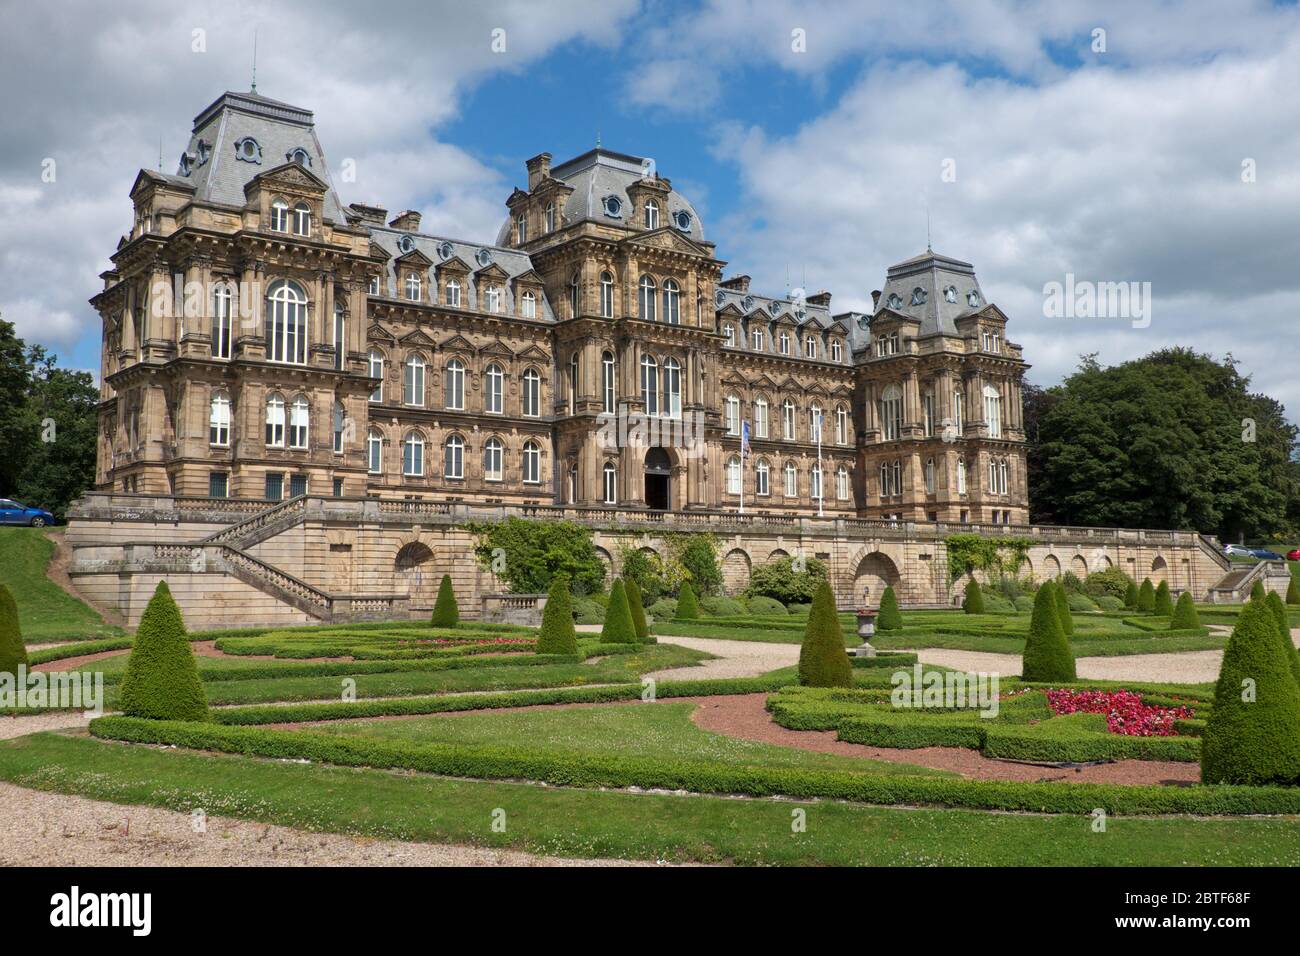 The Bowes Museum is one of the top visitor attractions in Barnard Castle, County Durham. Picture also shows its landscaped gardens Stock Photo